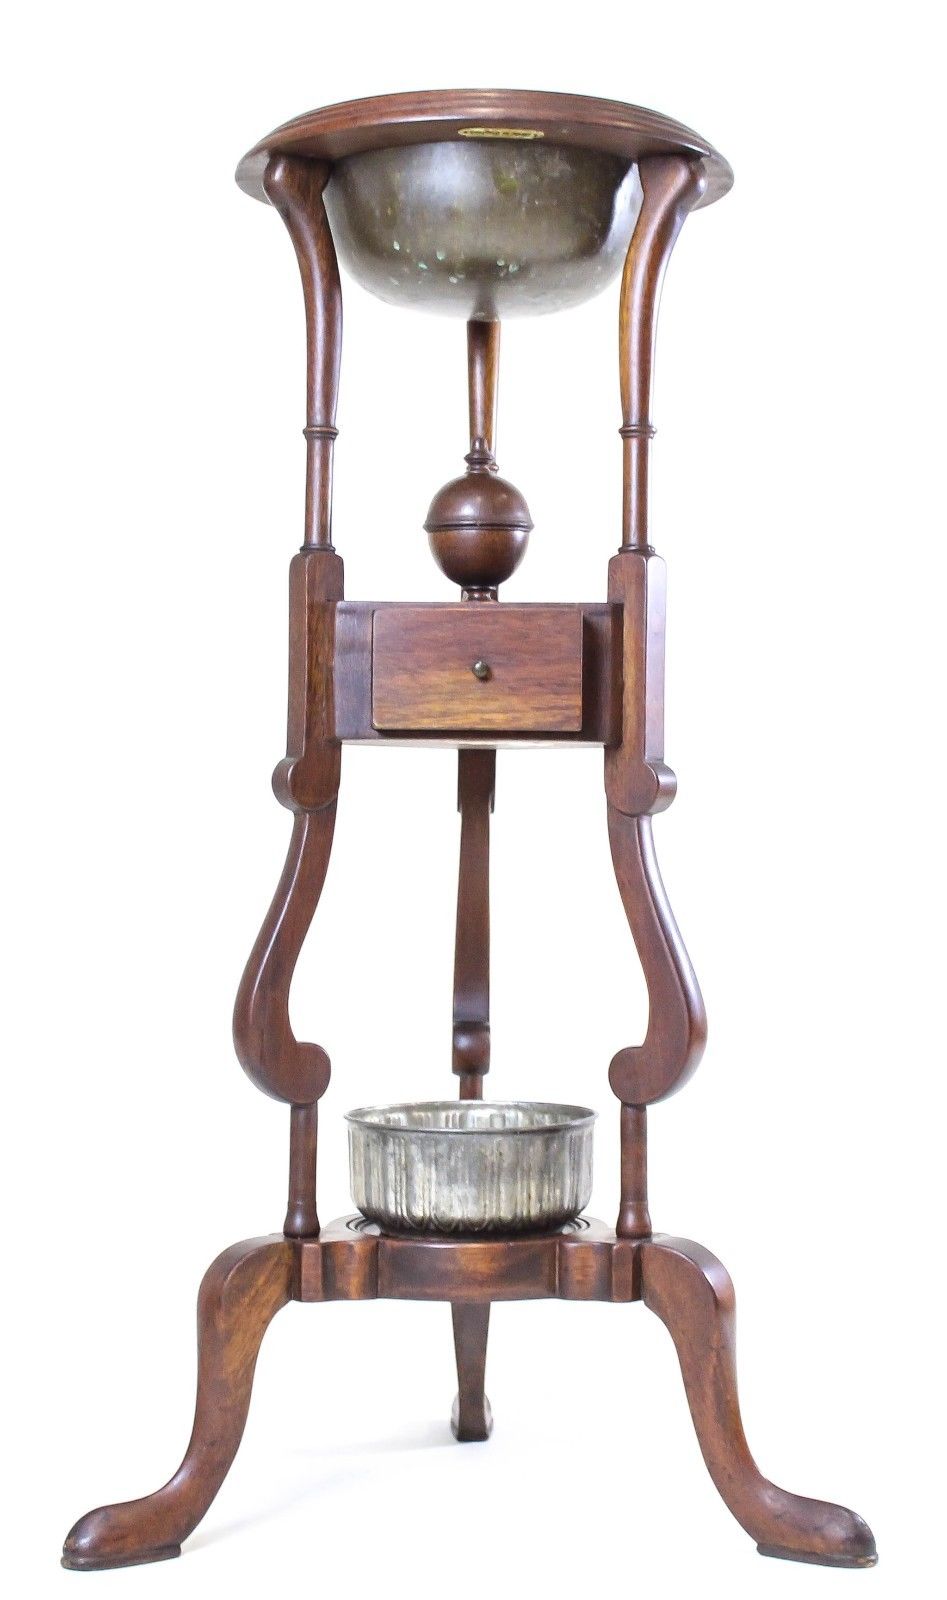 RARE GEORGIAN STYLED MAHOGANY WIG STAND-SEE MOUNT VERNON COLLECTION